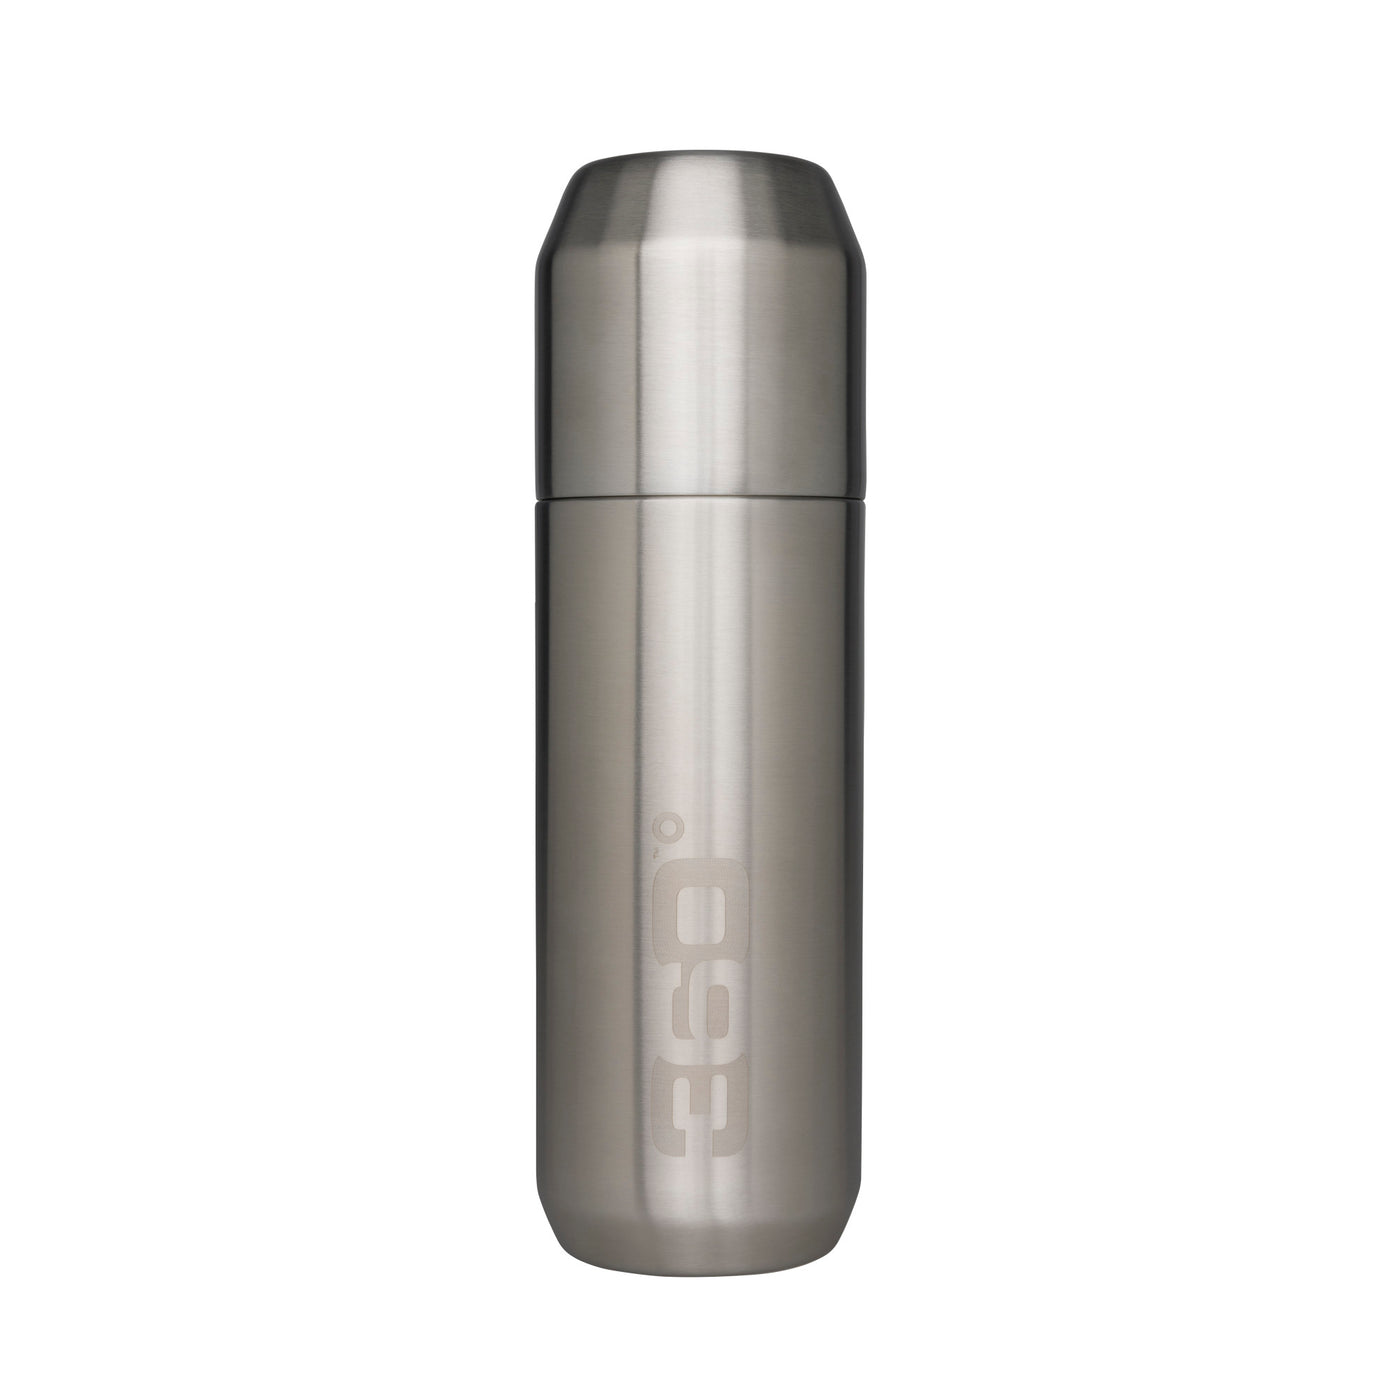 Vacuum Insulated Stainless Steel Flask 750ml